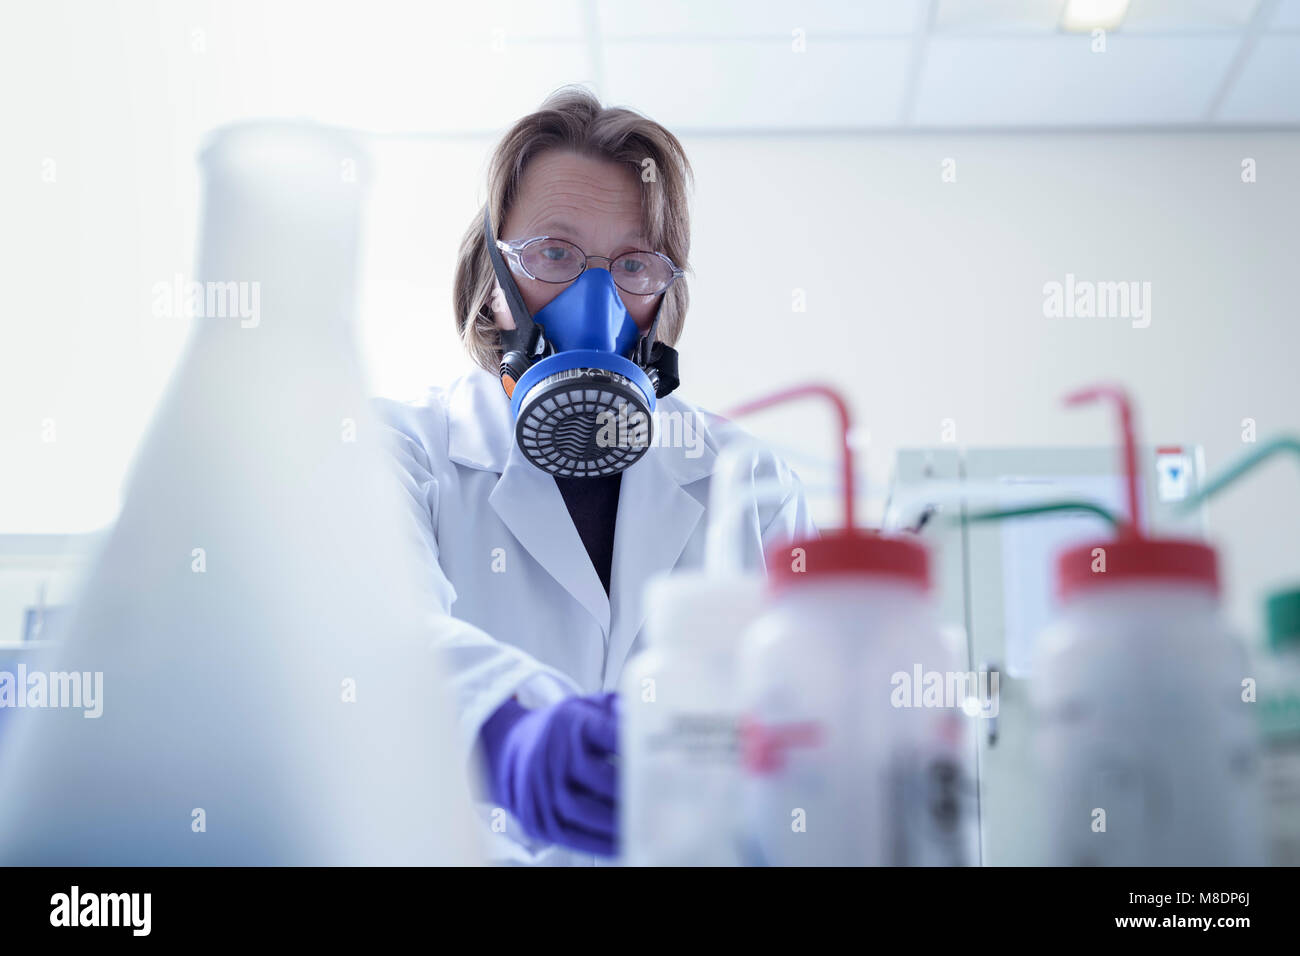 Scientist in breathing apparatus working in laboratory Stock Photo